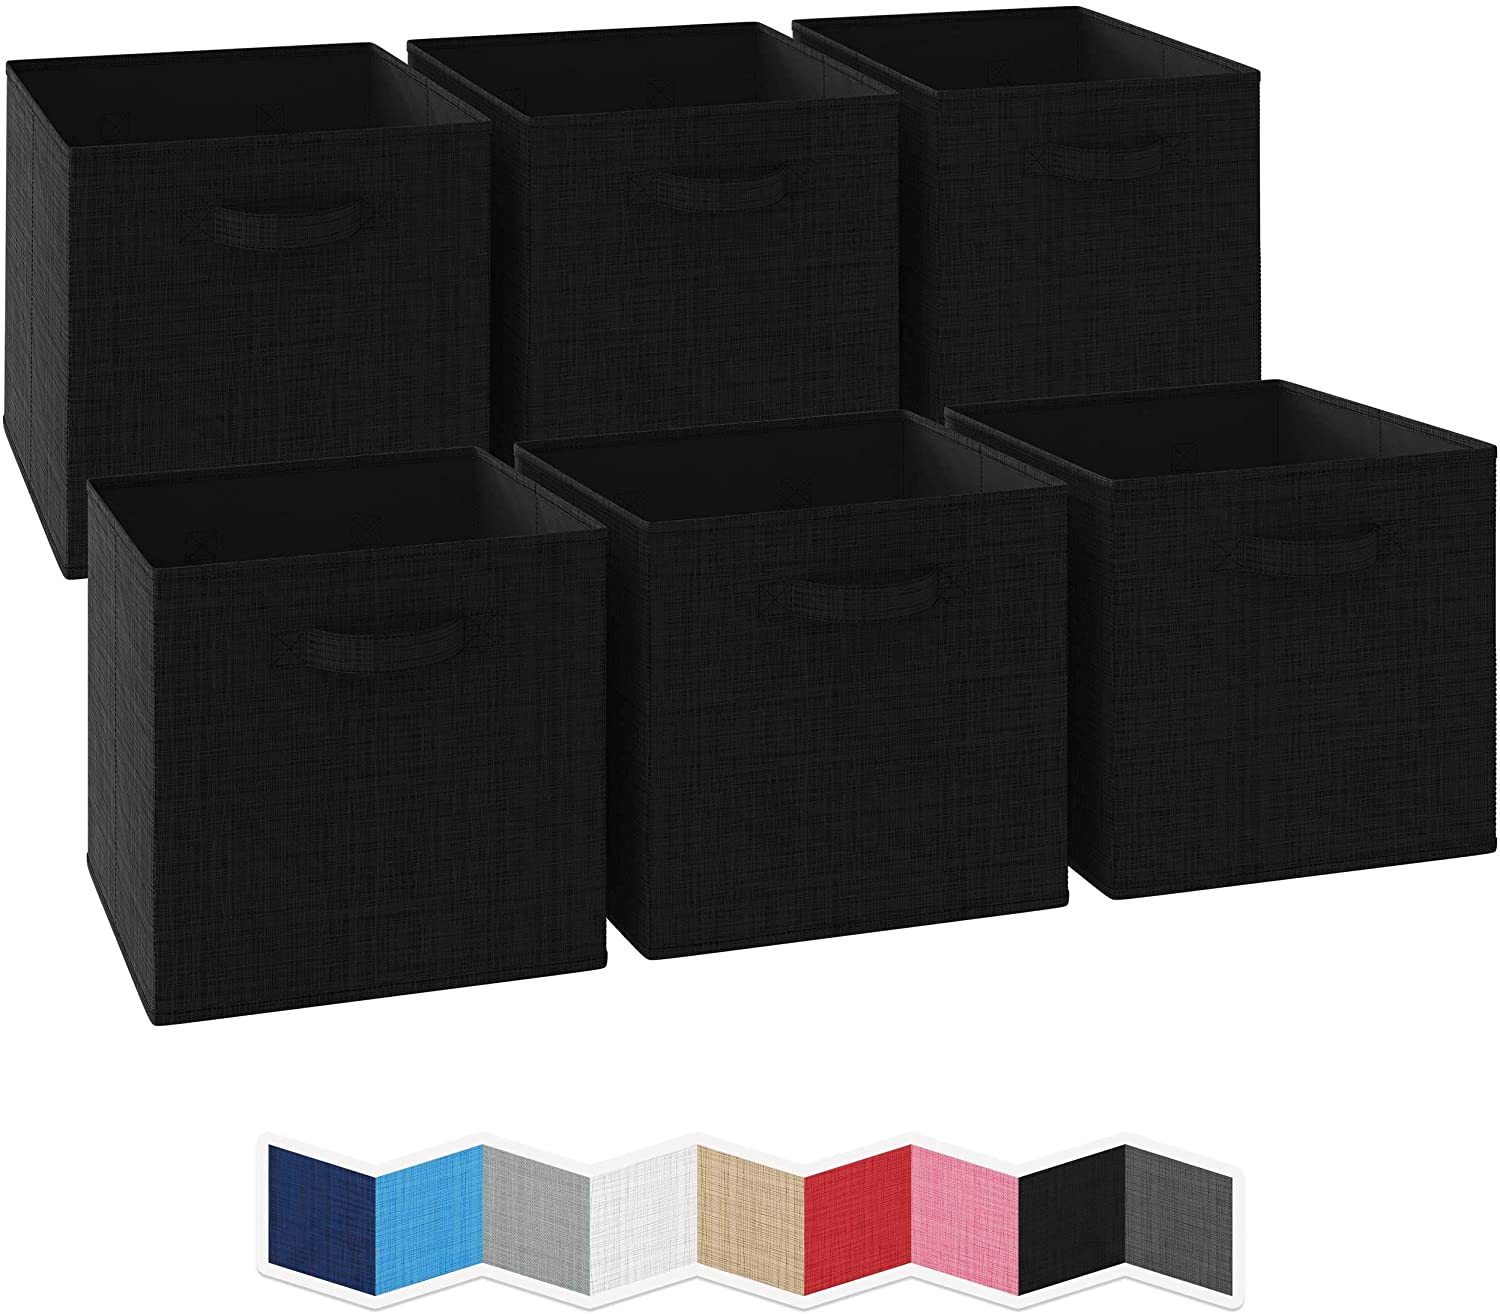 NEATERIZE Foldable Fabric Dual-Handled Storage Bins & Boxes, 6-Pack